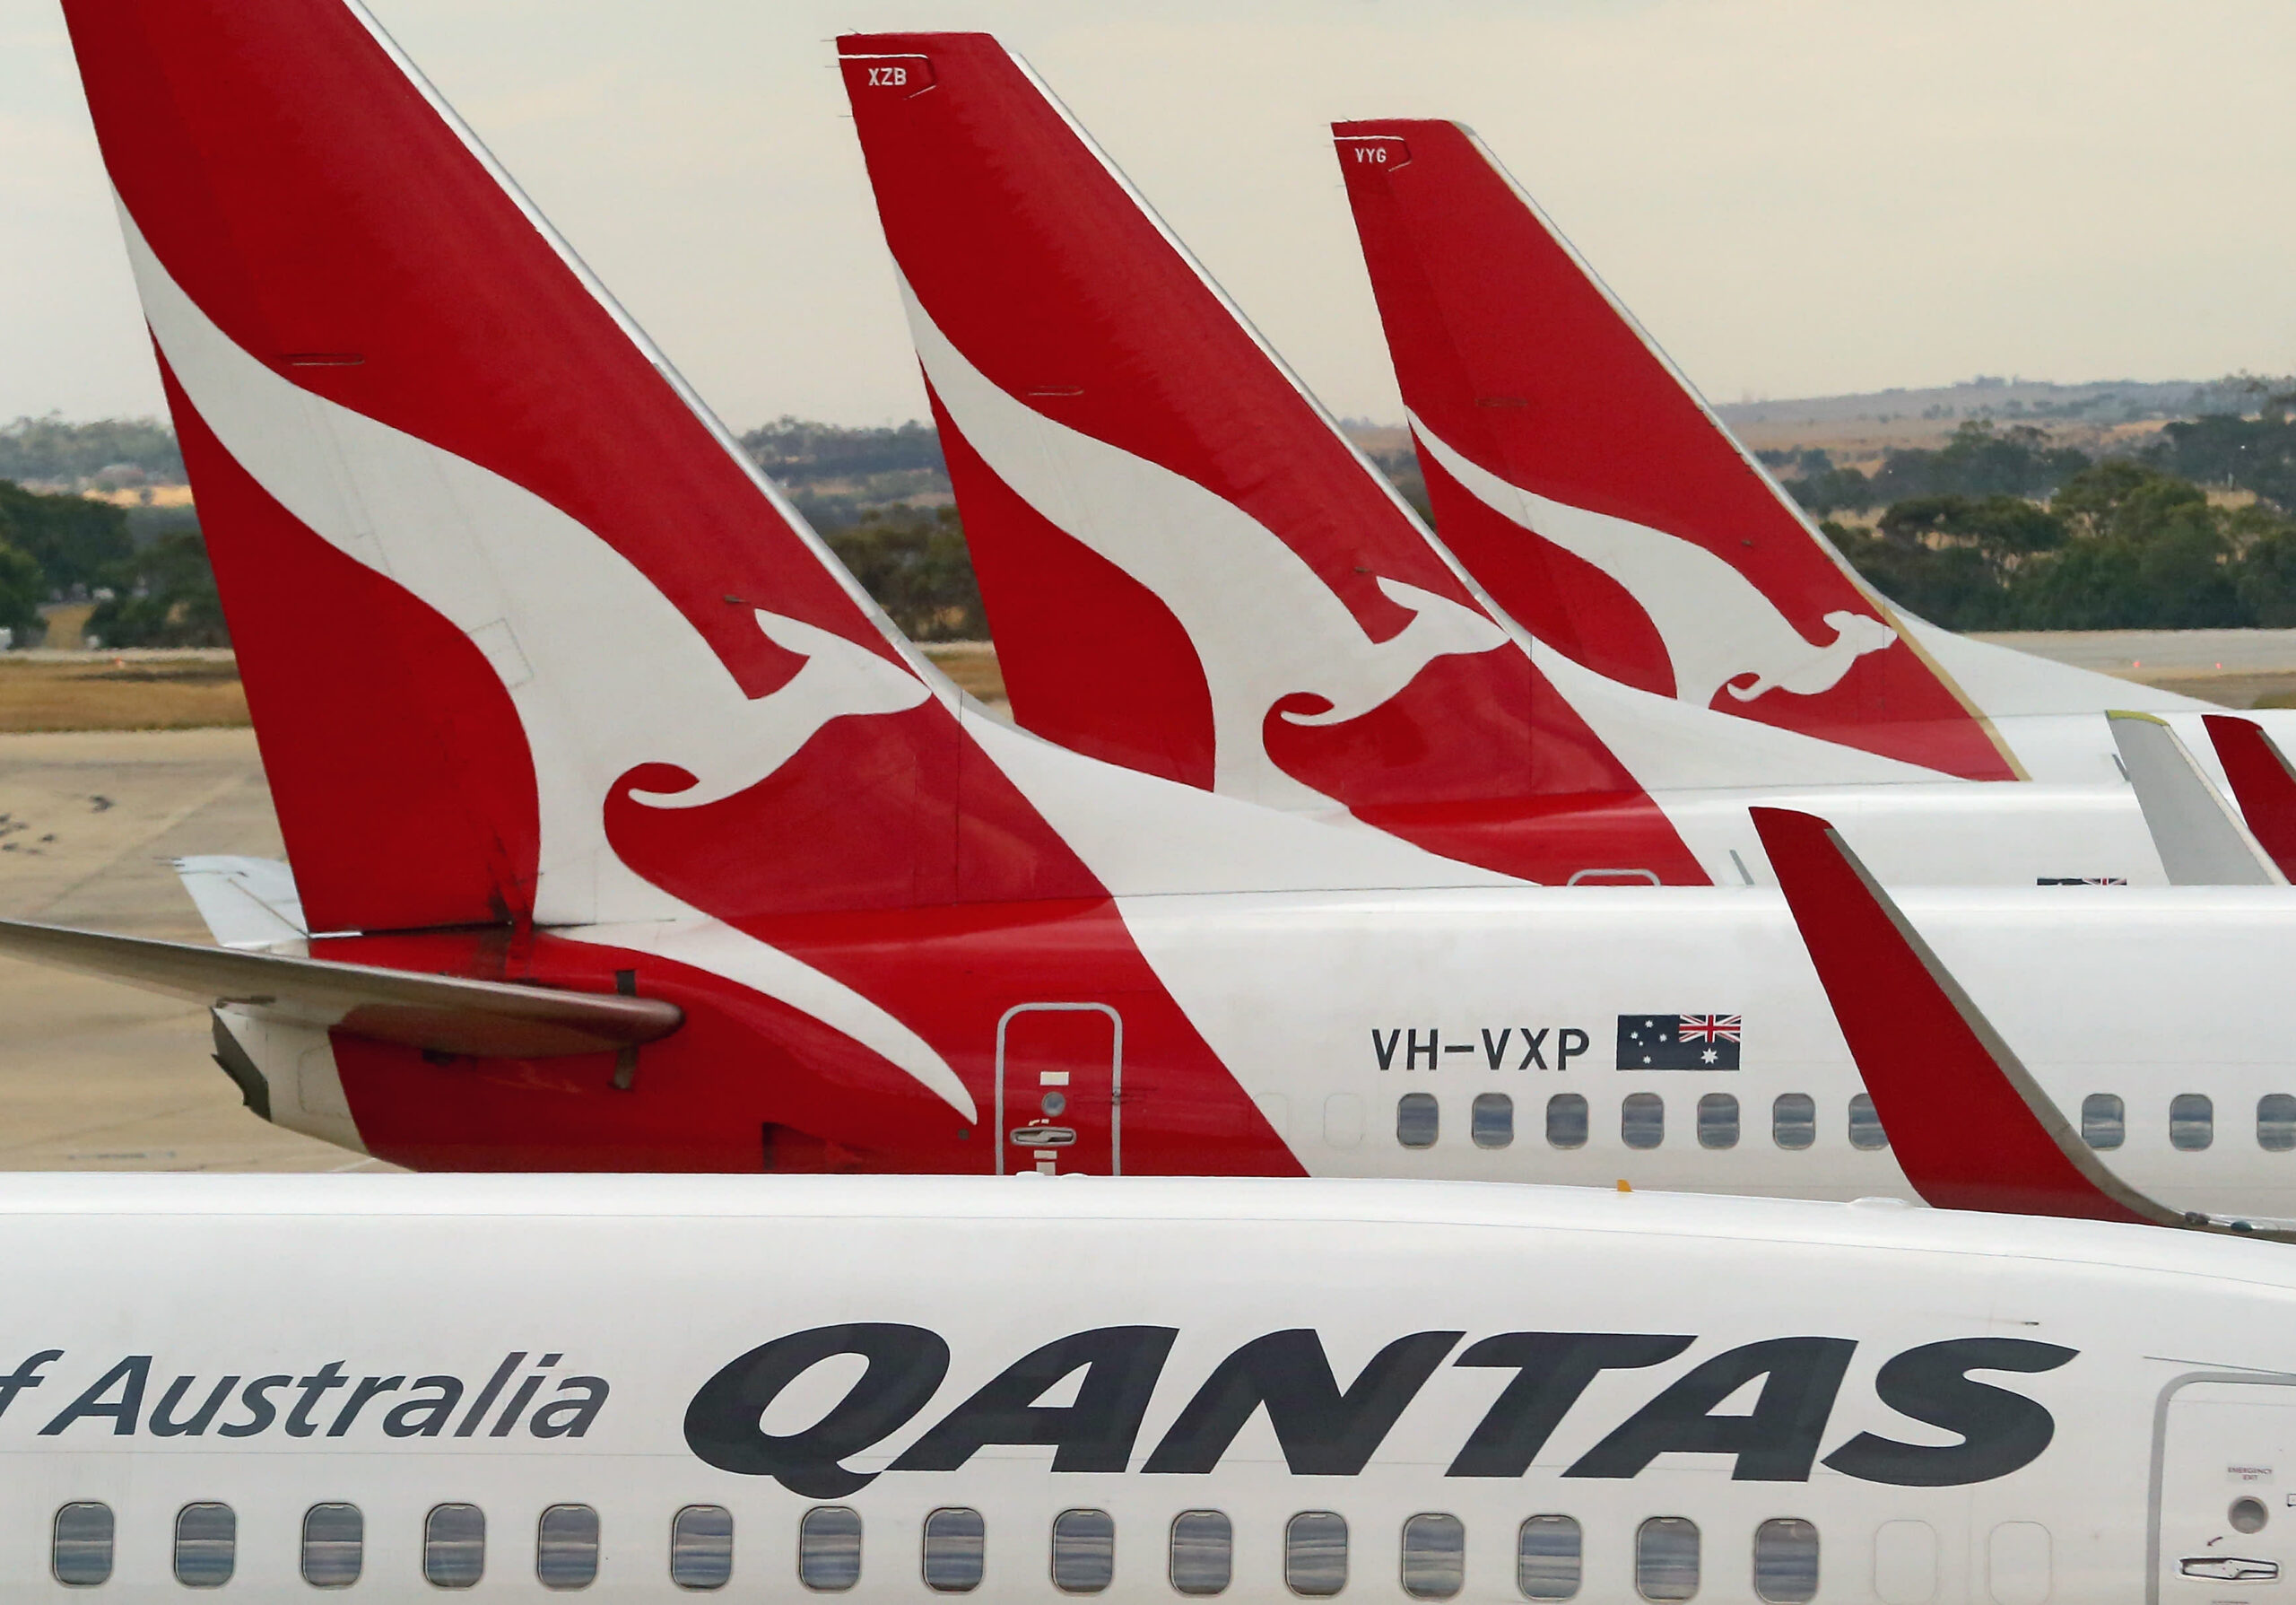 Australia Qantas getting ready for worldwide flights from December, CEO says